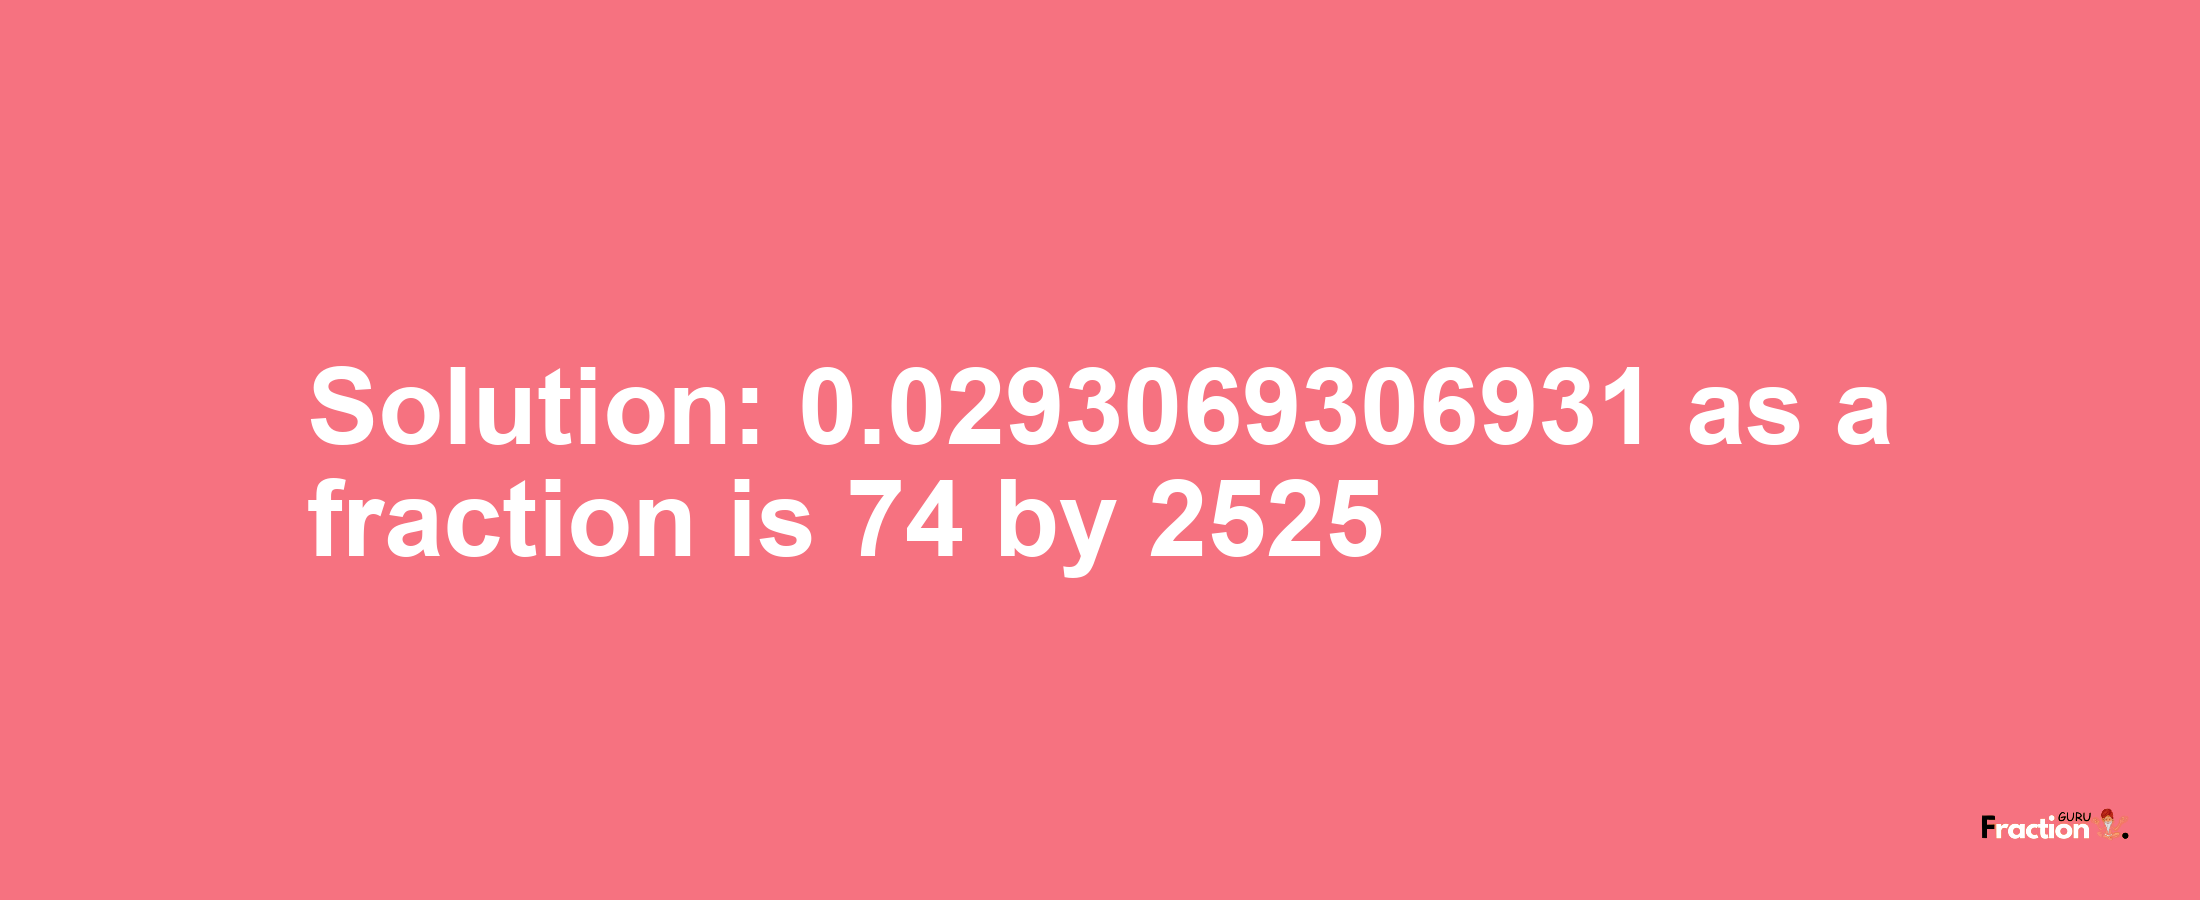 Solution:0.0293069306931 as a fraction is 74/2525